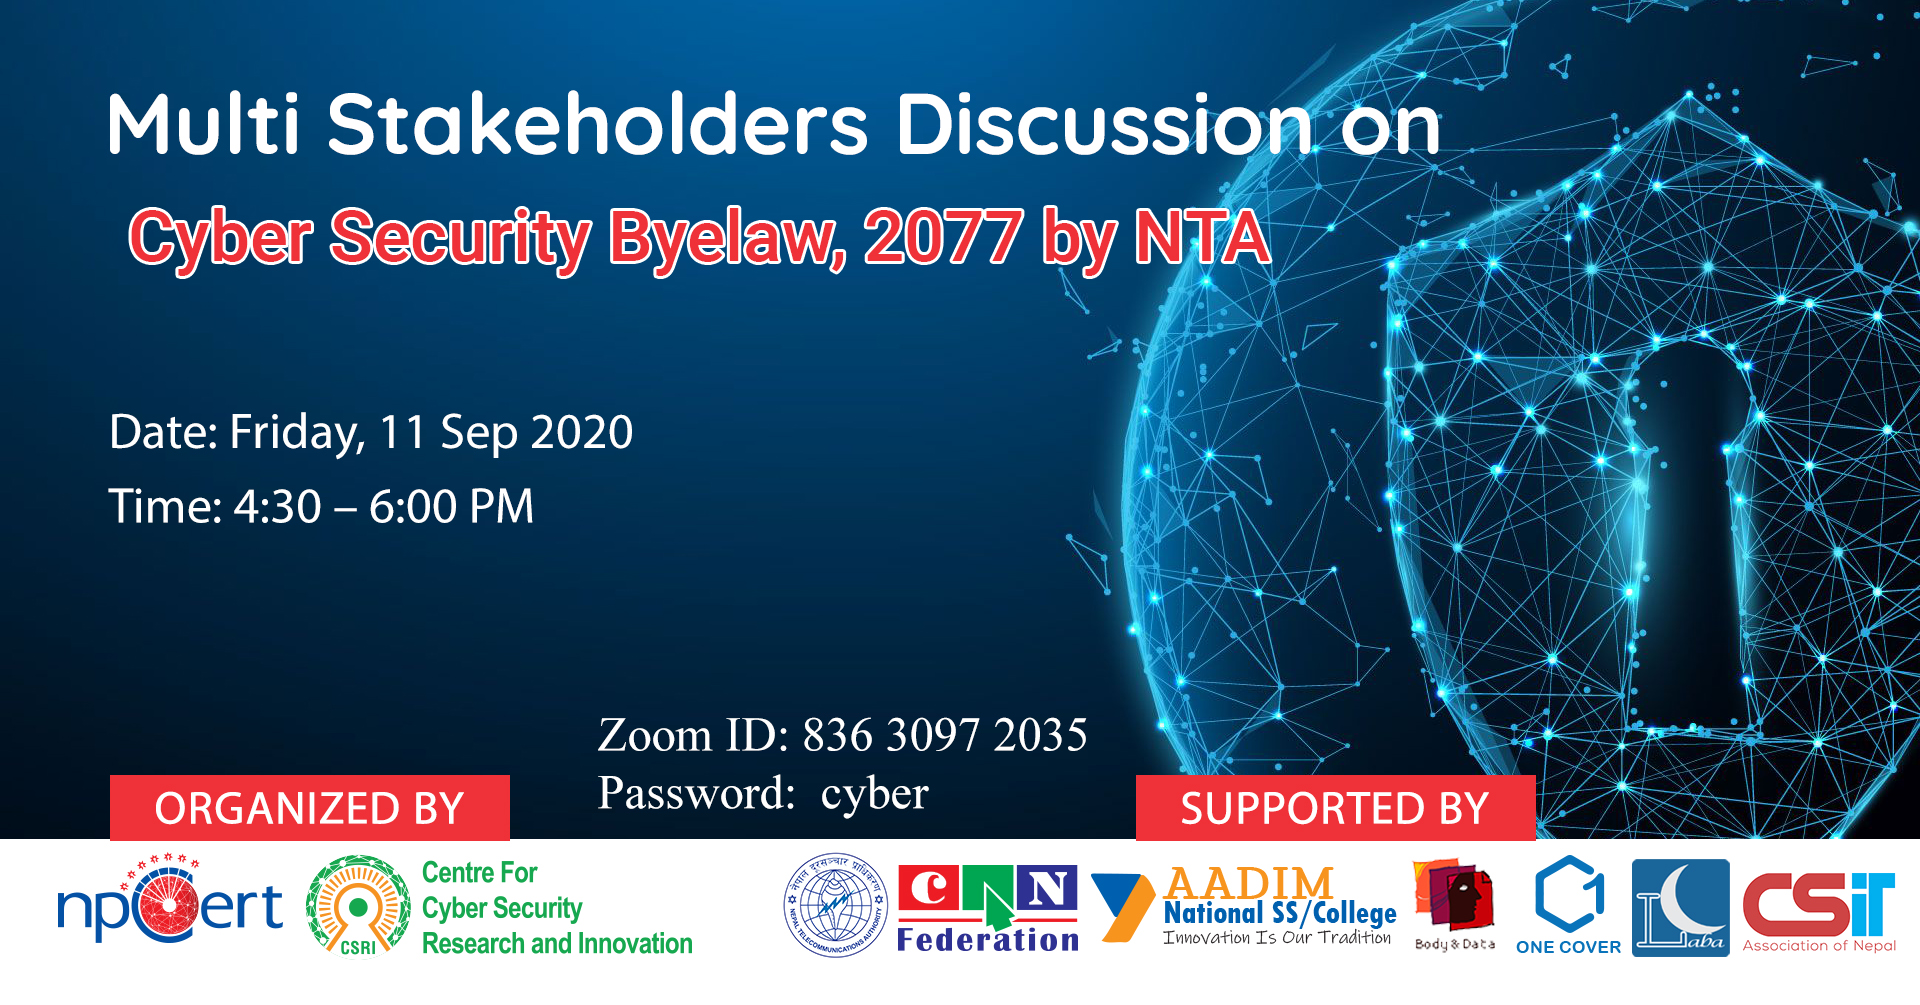 Multi-Stakeholder Discussion on NTA Cyber Security Byelaw 2077 (2020)